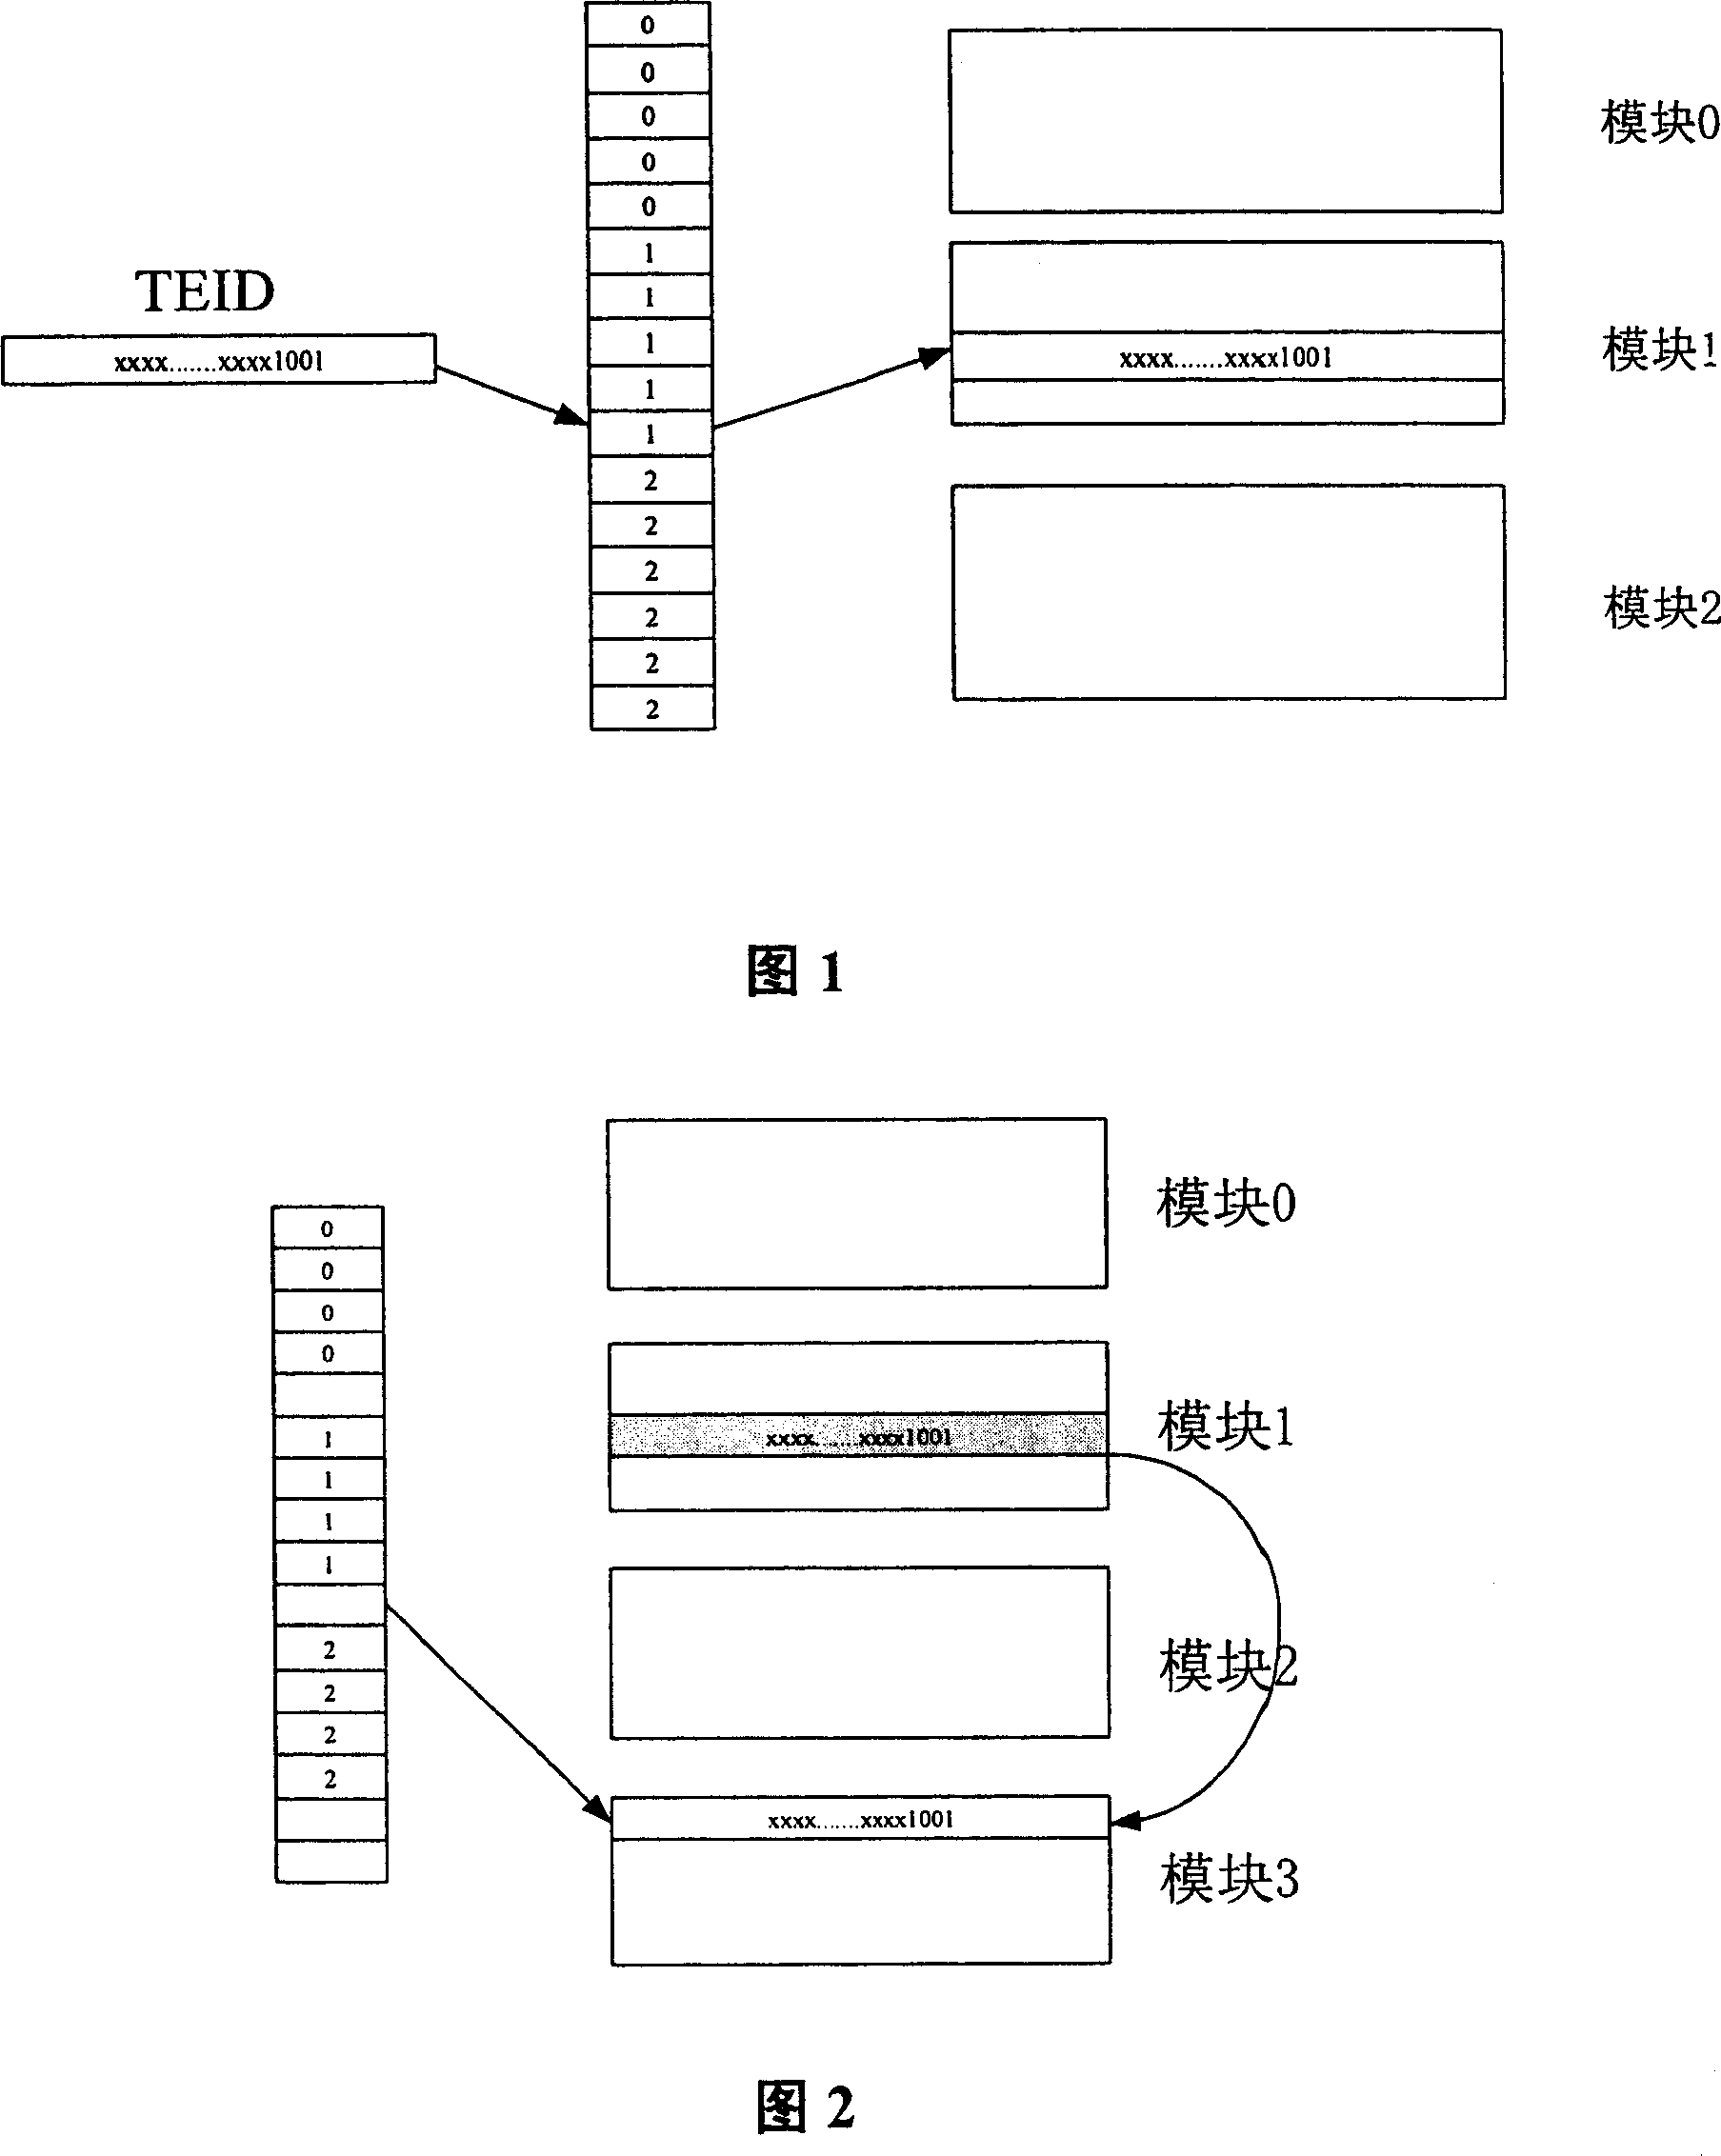 User's key assignment method supporting communication system nucleus netowrk